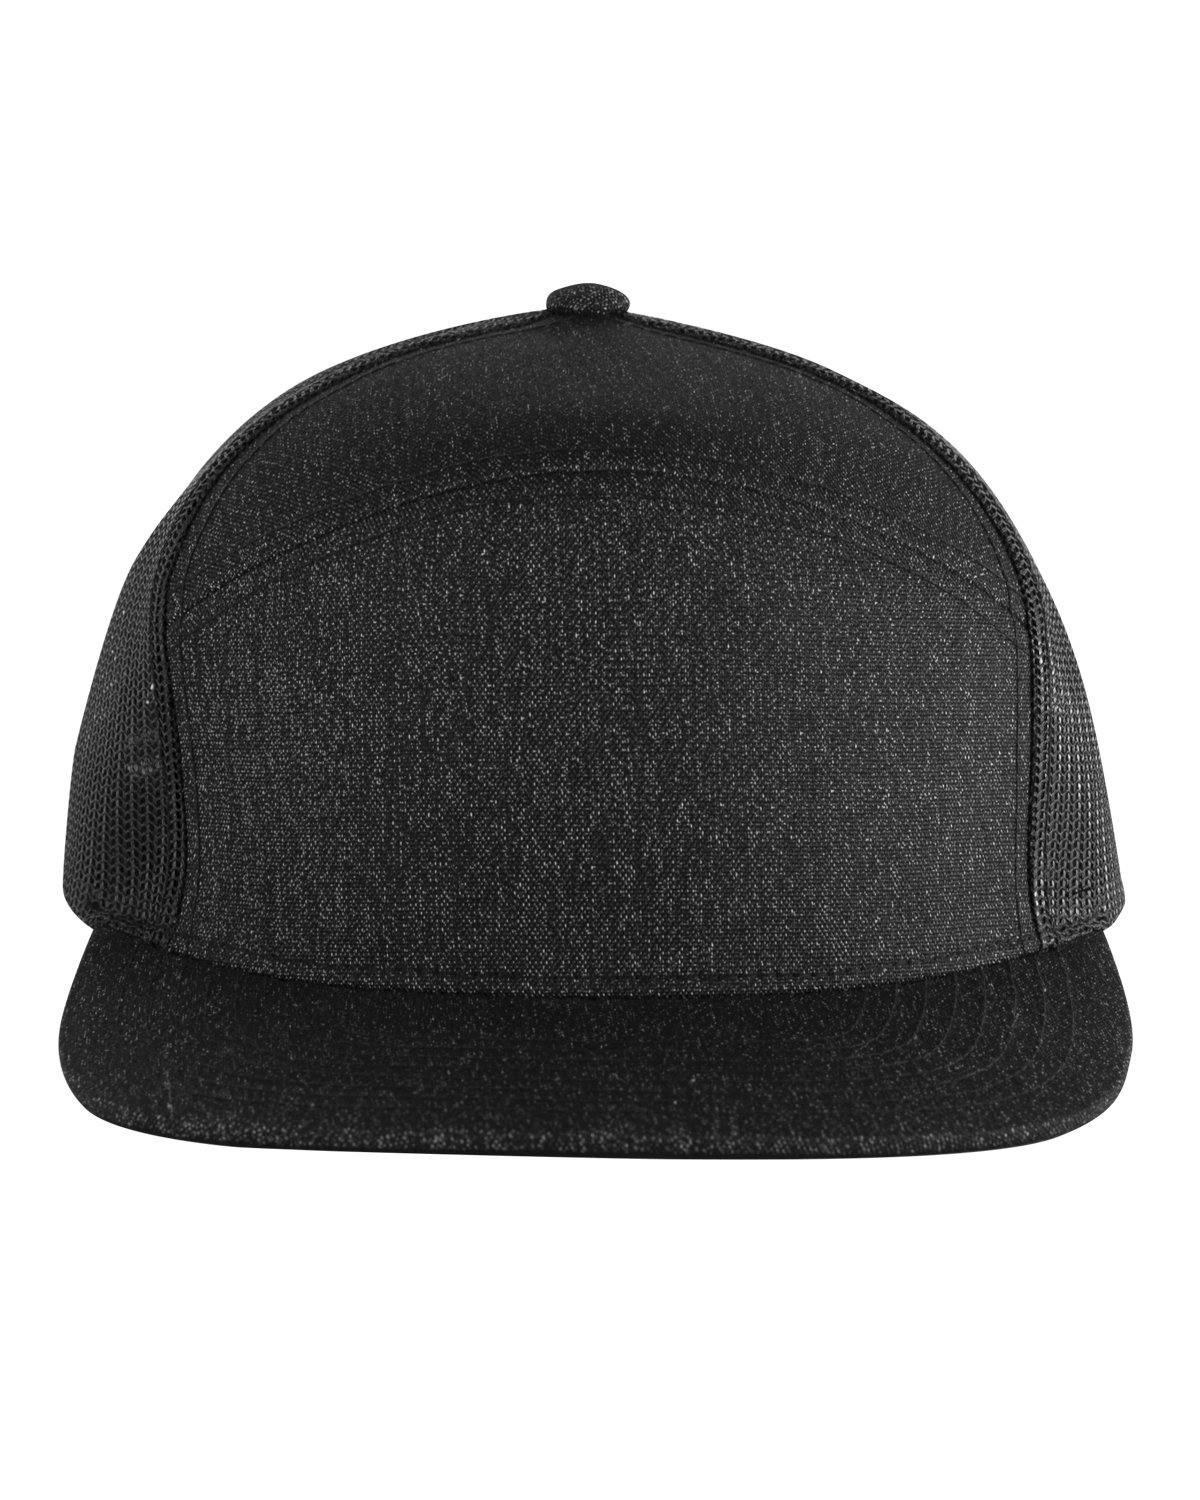 Image for Heathered Arch Trucker Snapback Cap